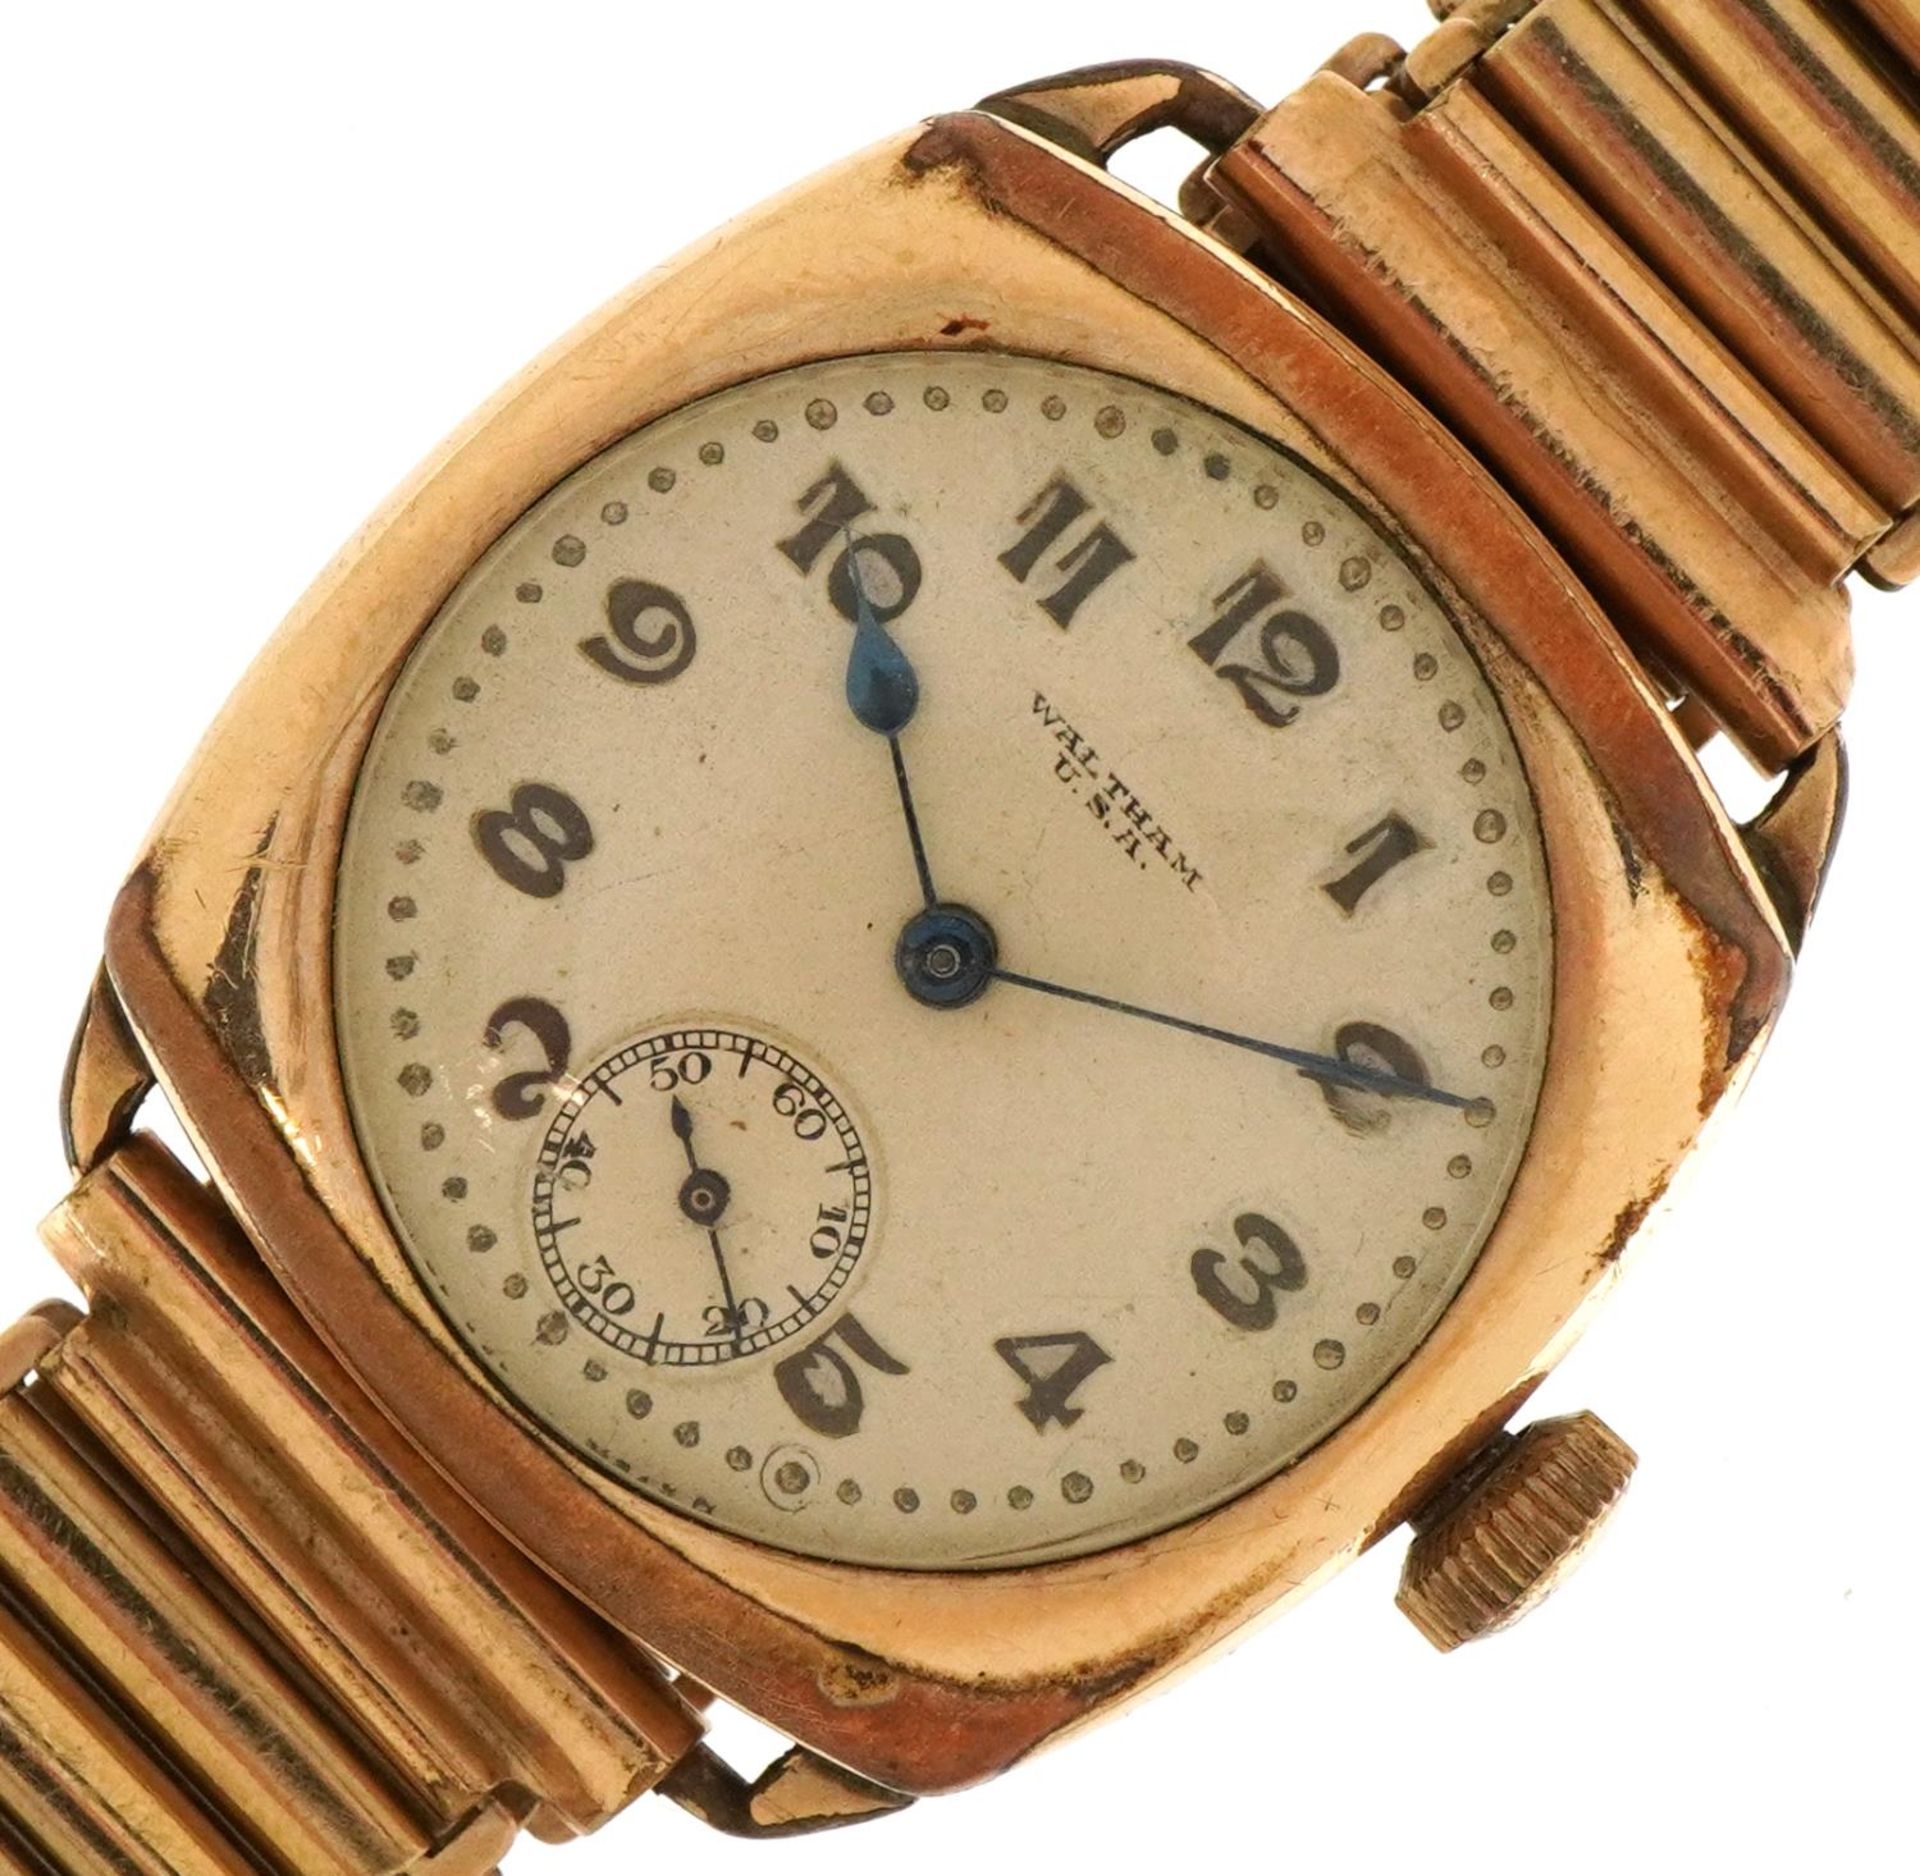 Waltham, gentlemen's Waltham trench style wristwatch with subsidiary dial, the case 30mm wide